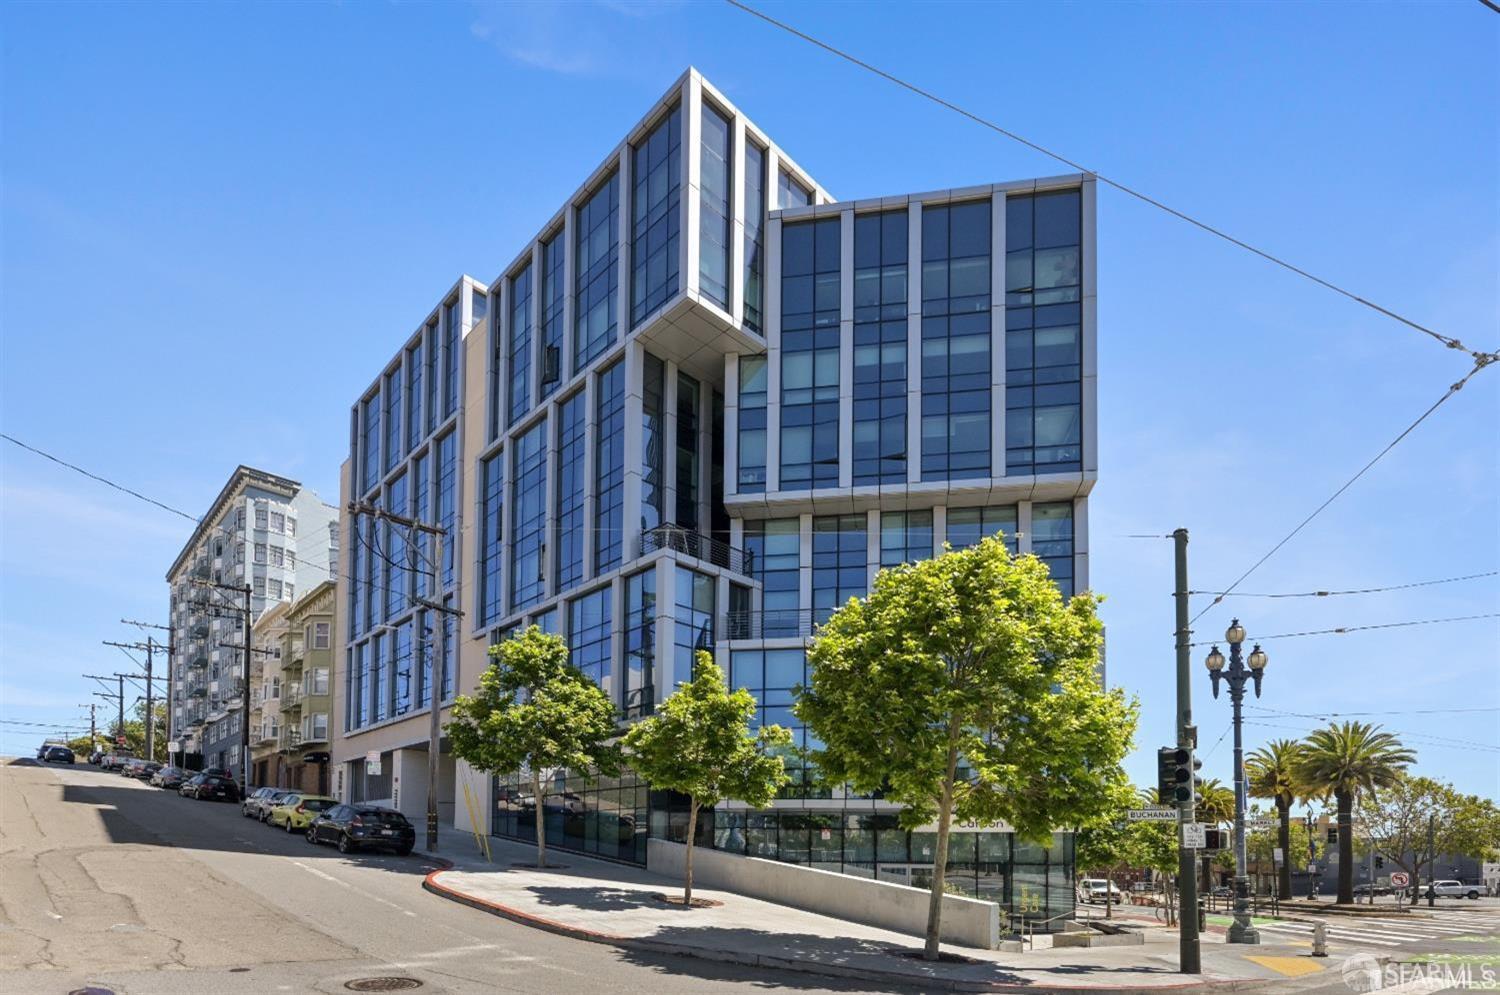 You might also be interested in HAYES VALLEY